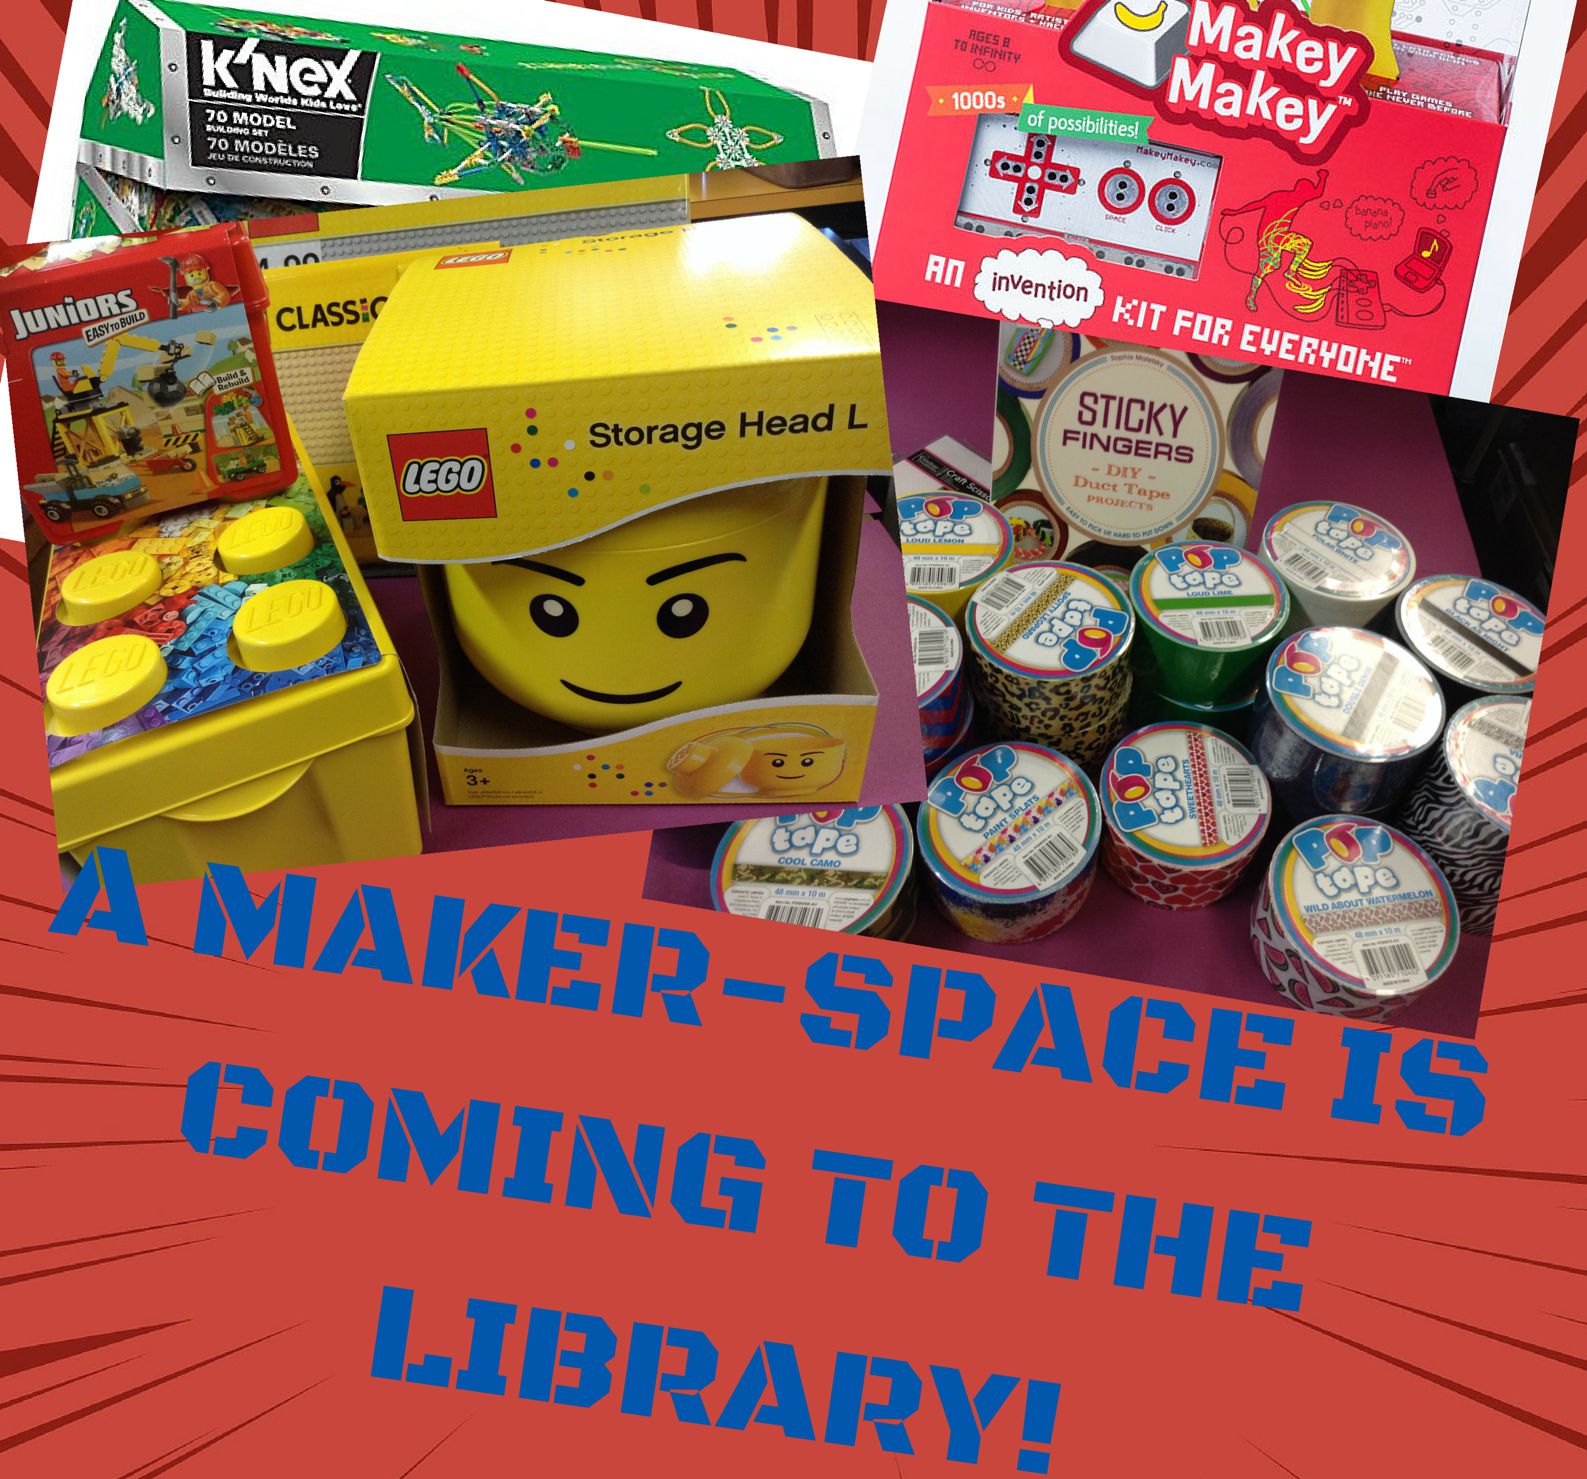 Makerspace Starter Kit | The Bookmarking Librarian